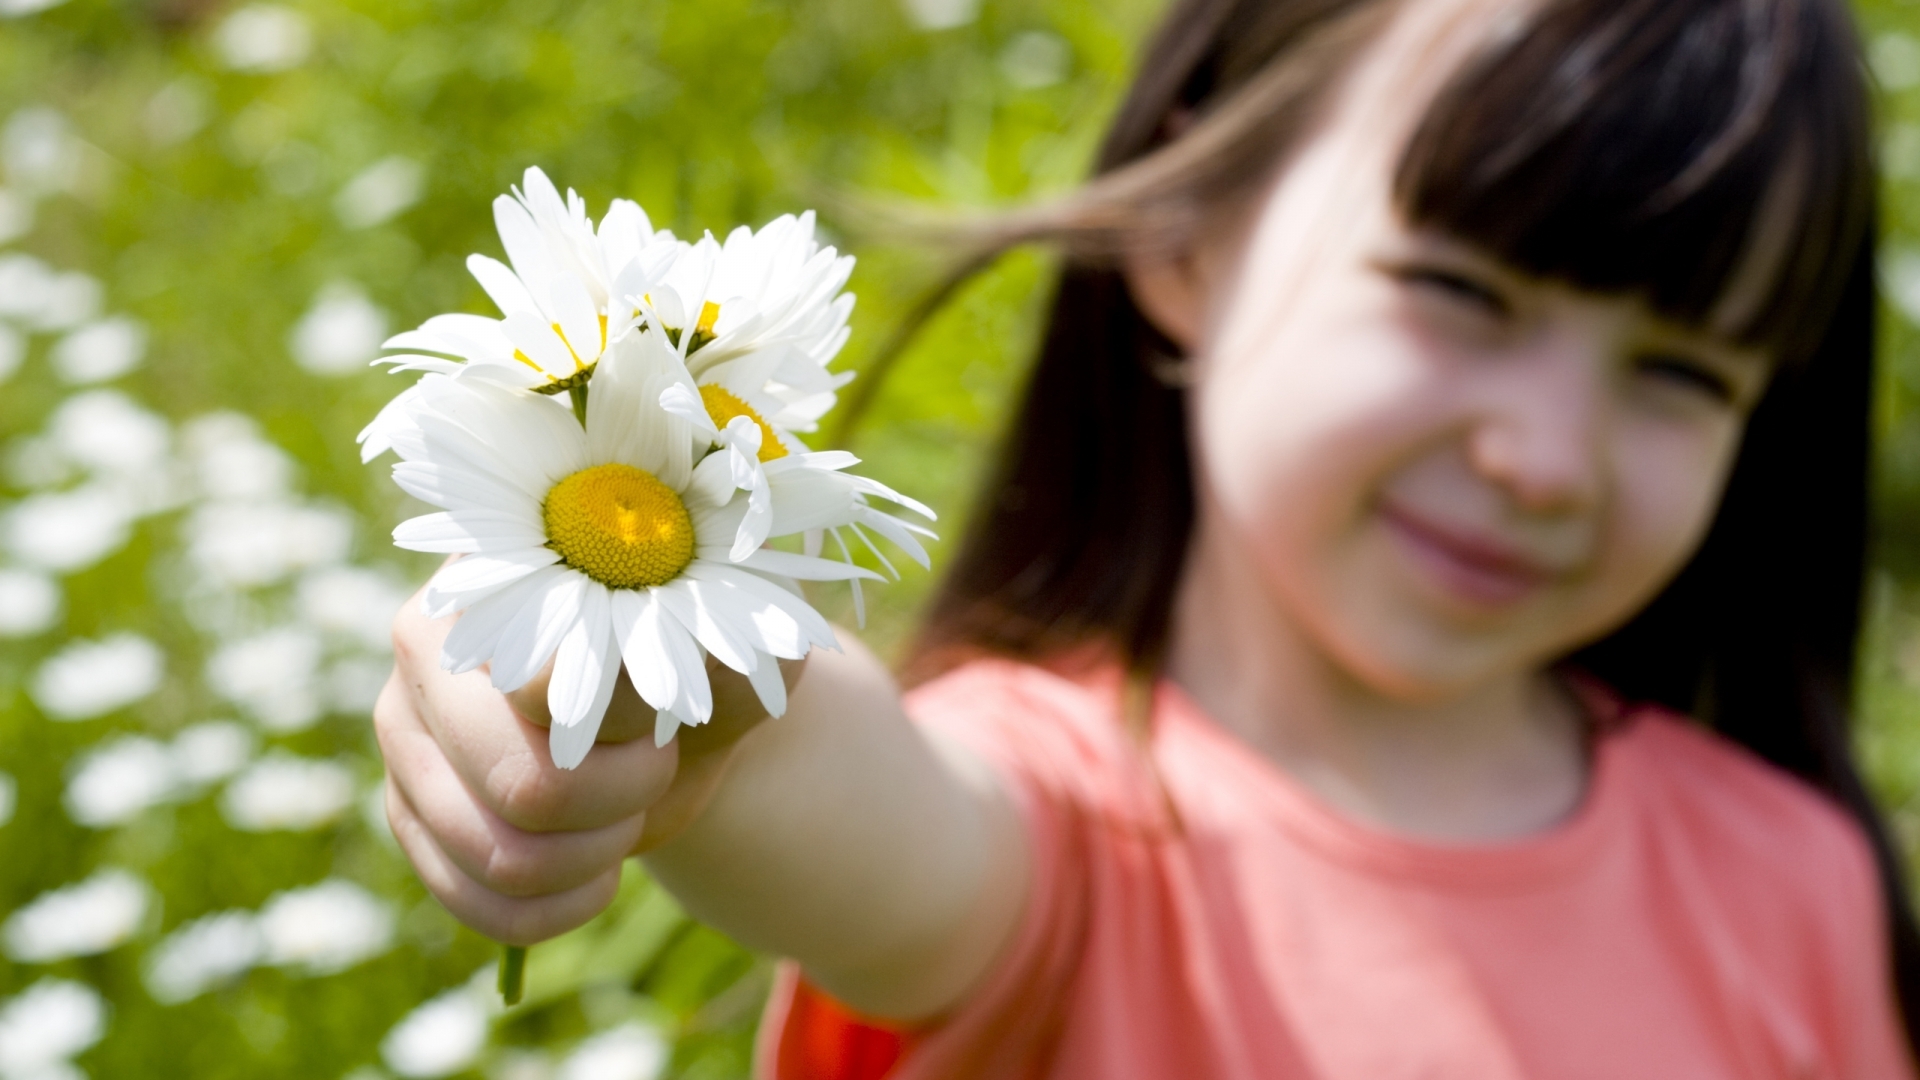 plants, people, flowers, children, camomile